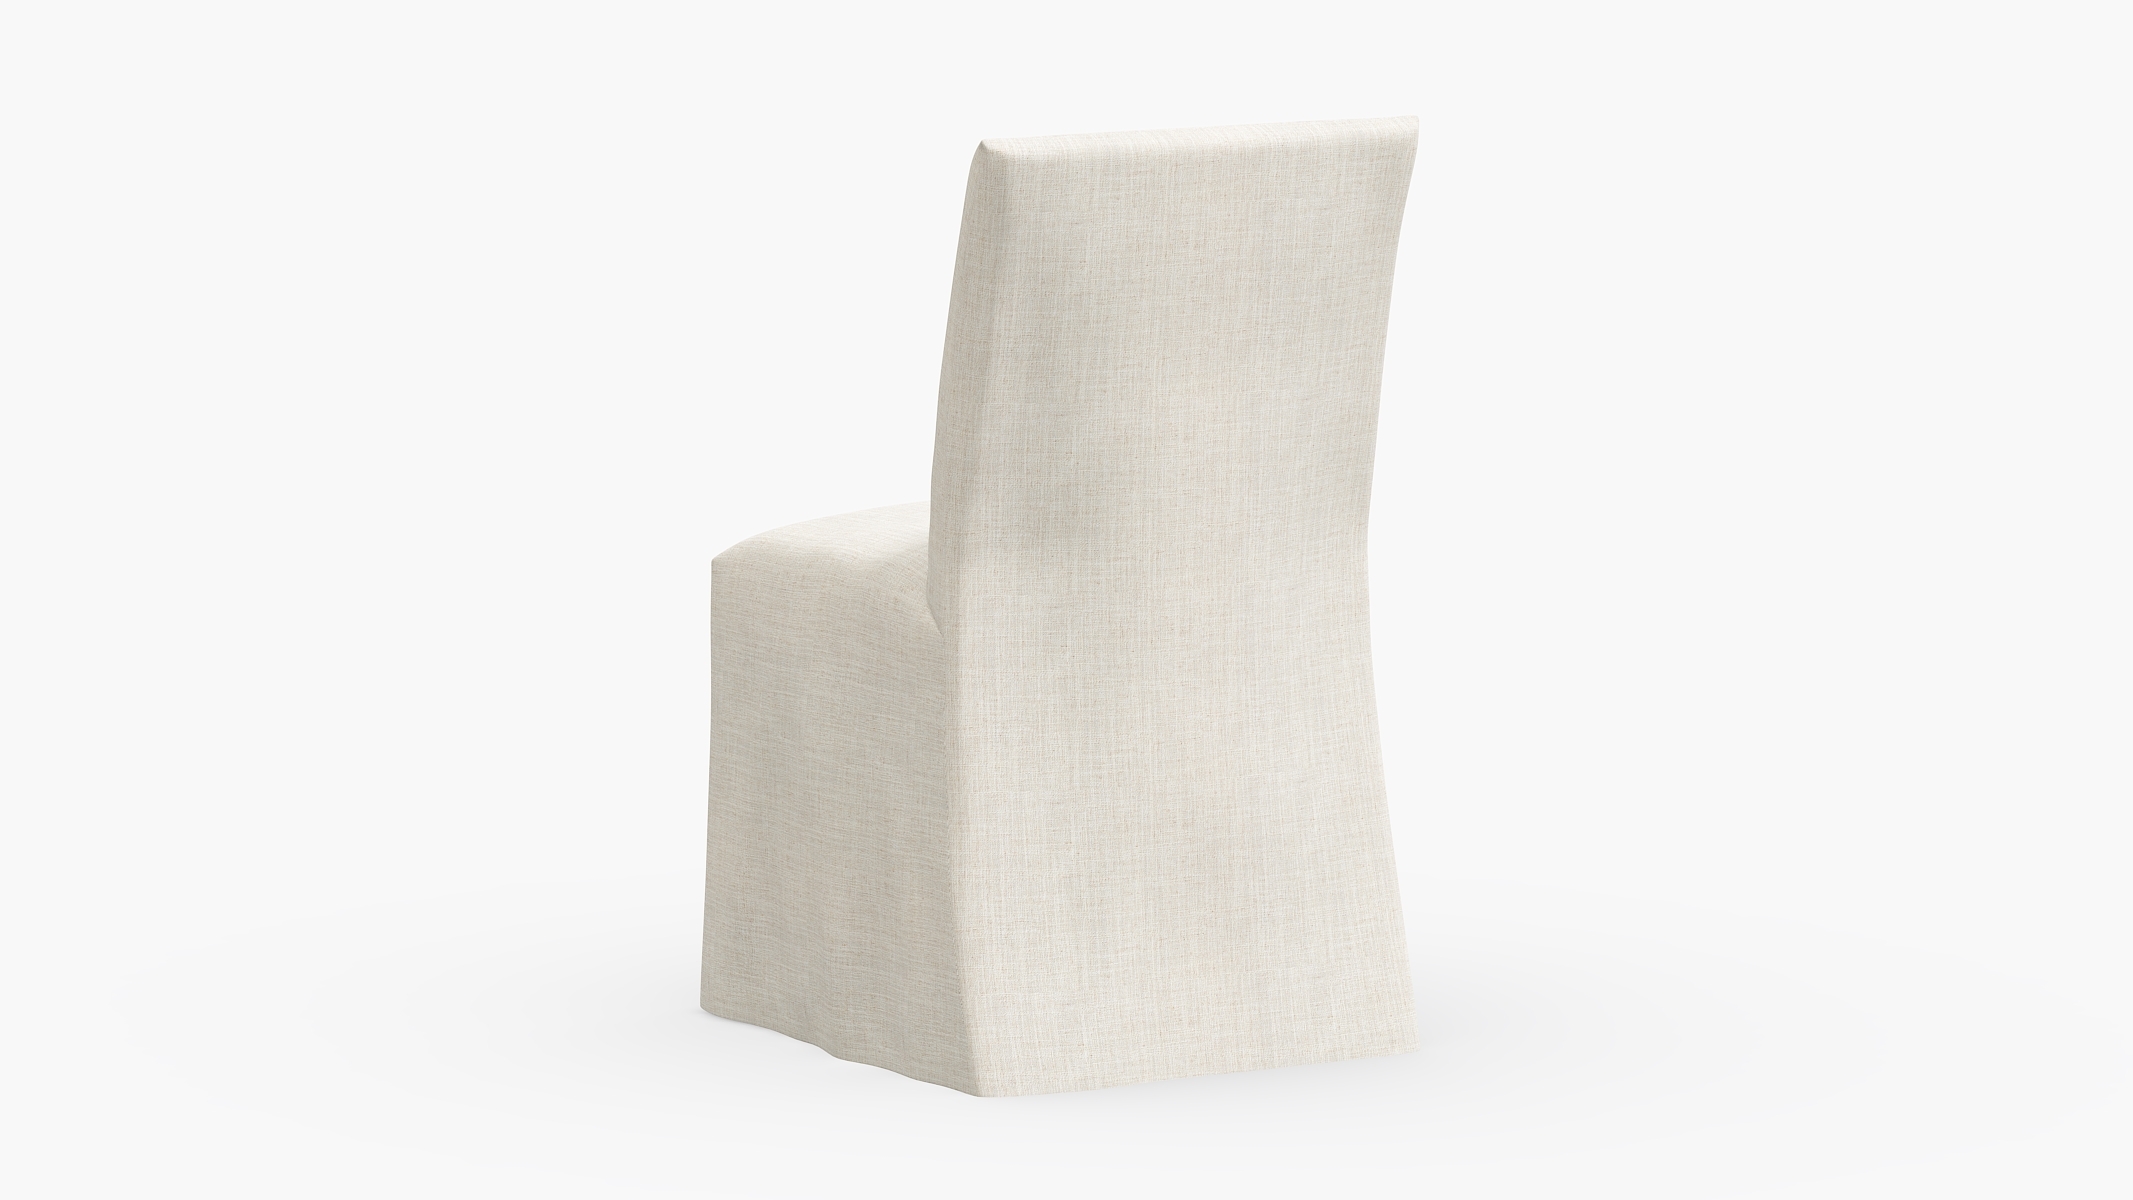 Slipcovered Dining Chair, Talc Everyday Linen - Image 3